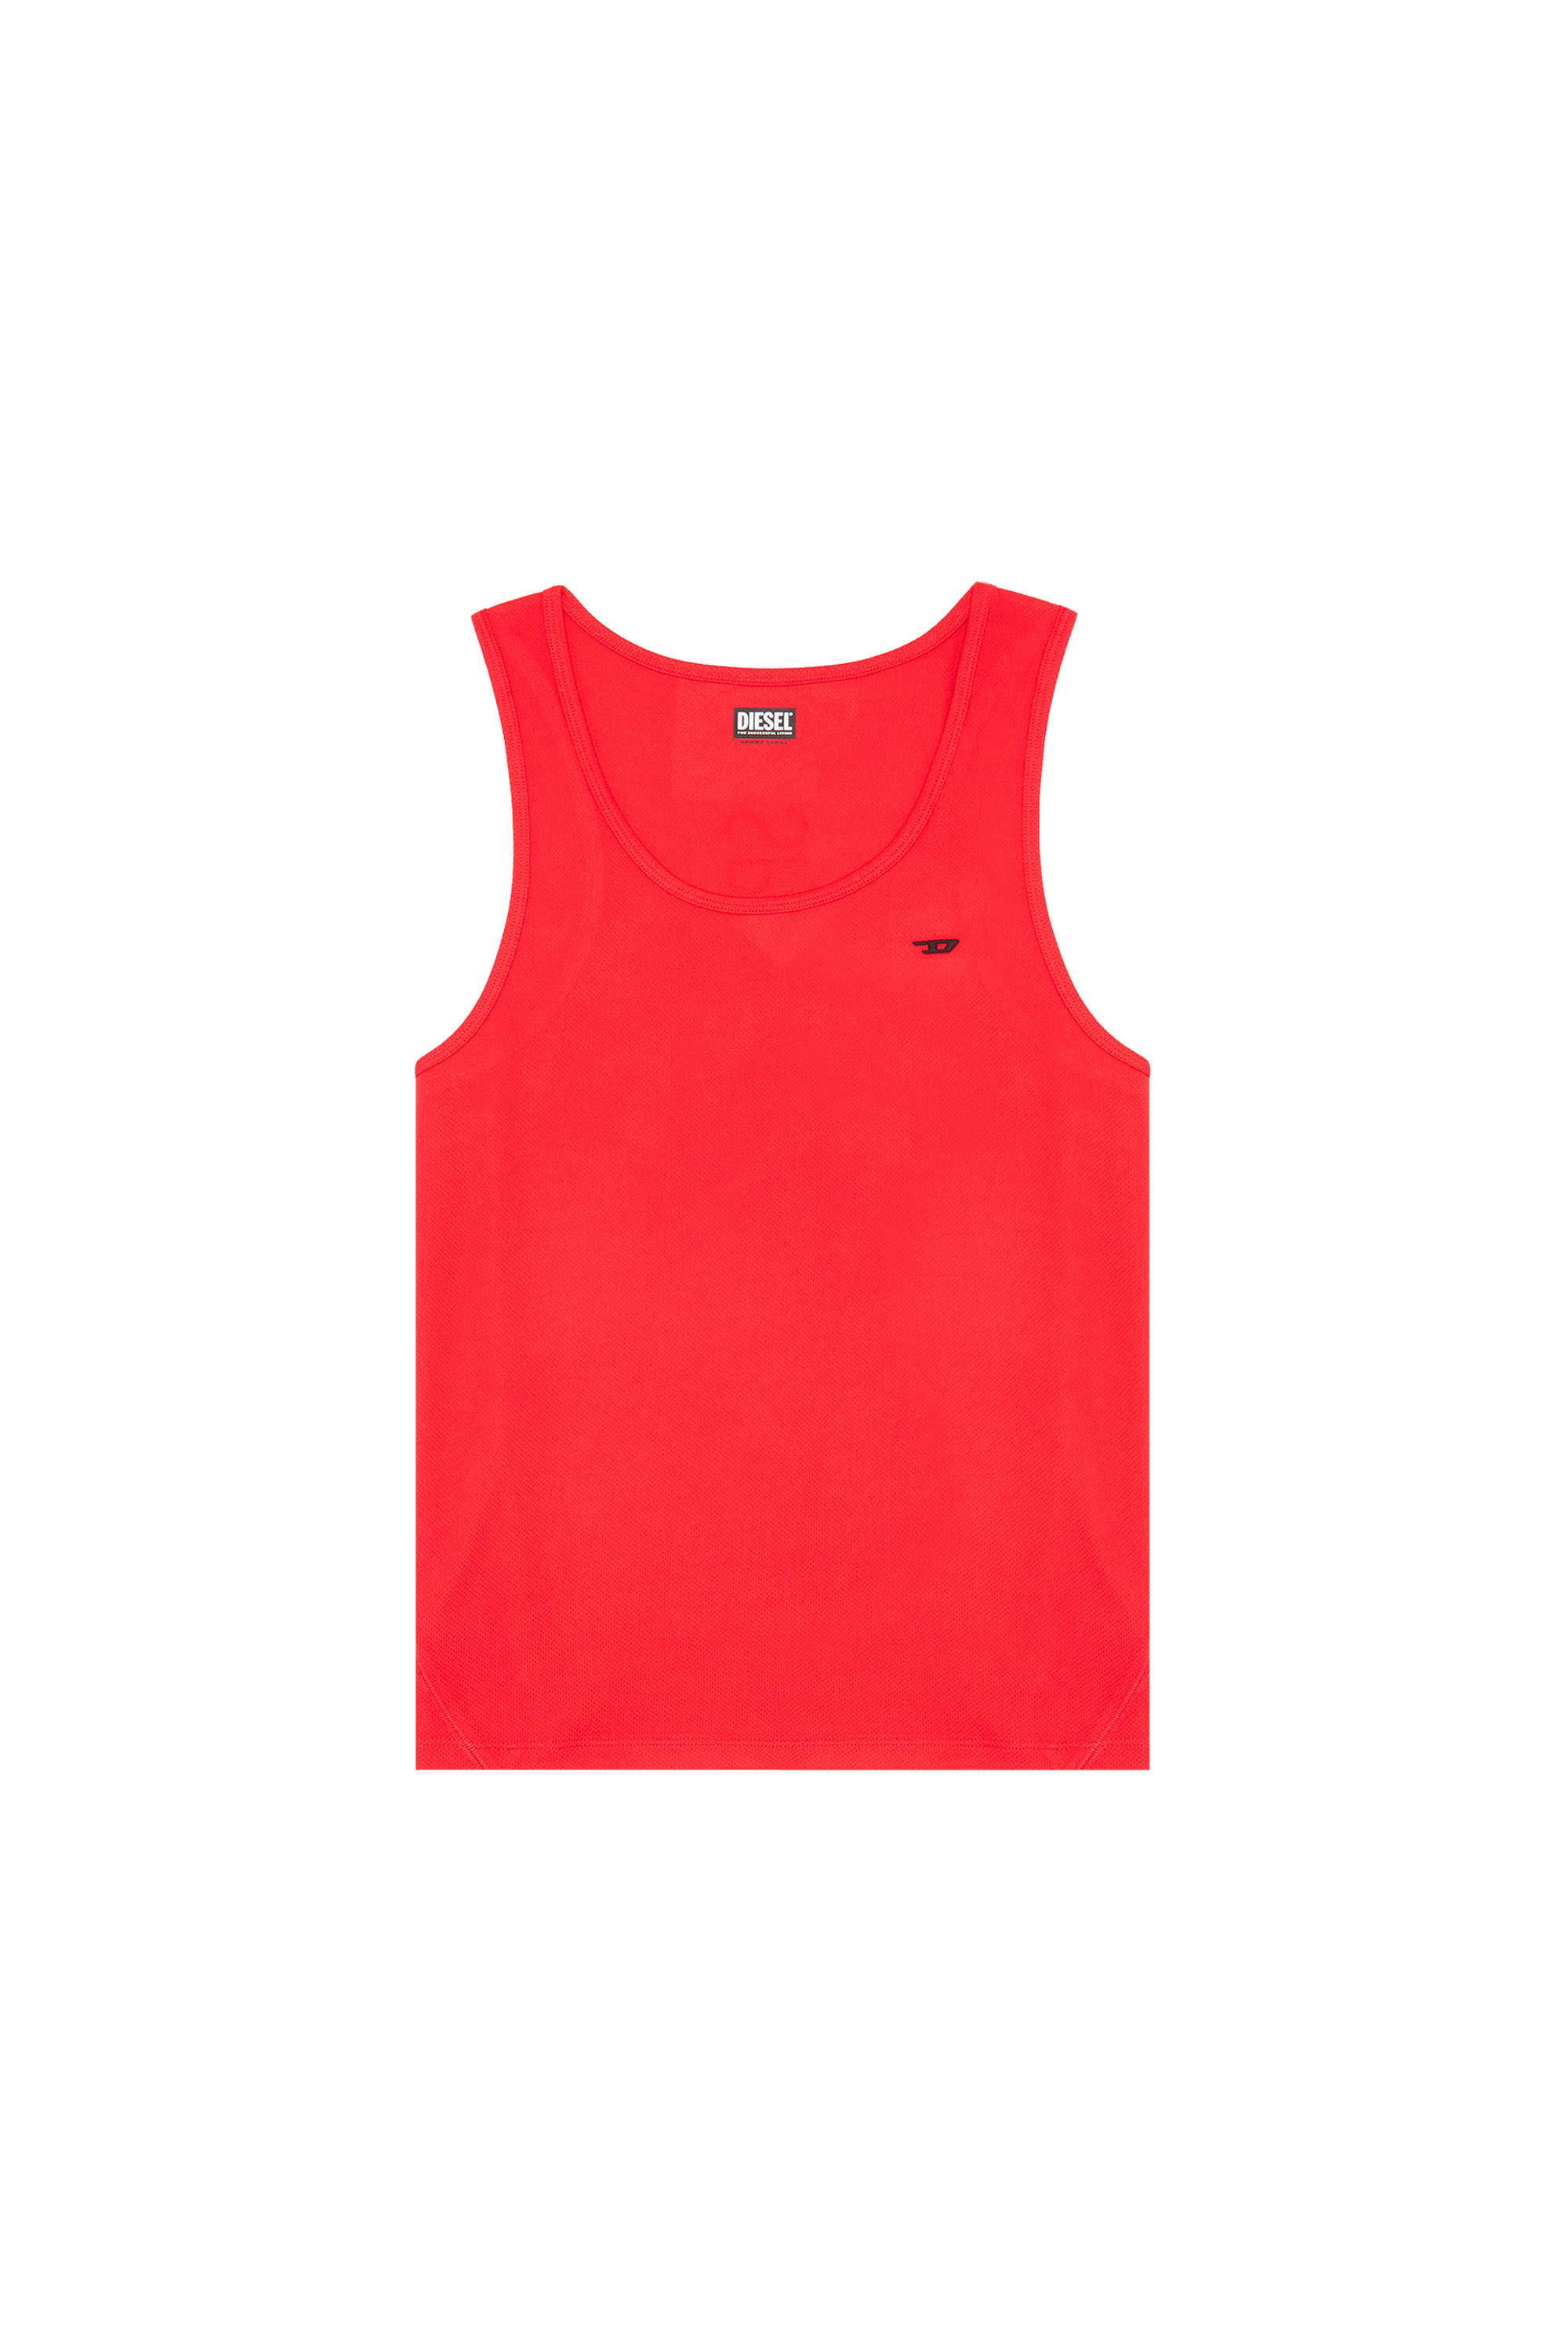 Diesel - AMST-SESSIOM-WT16, Rosso - Image 1